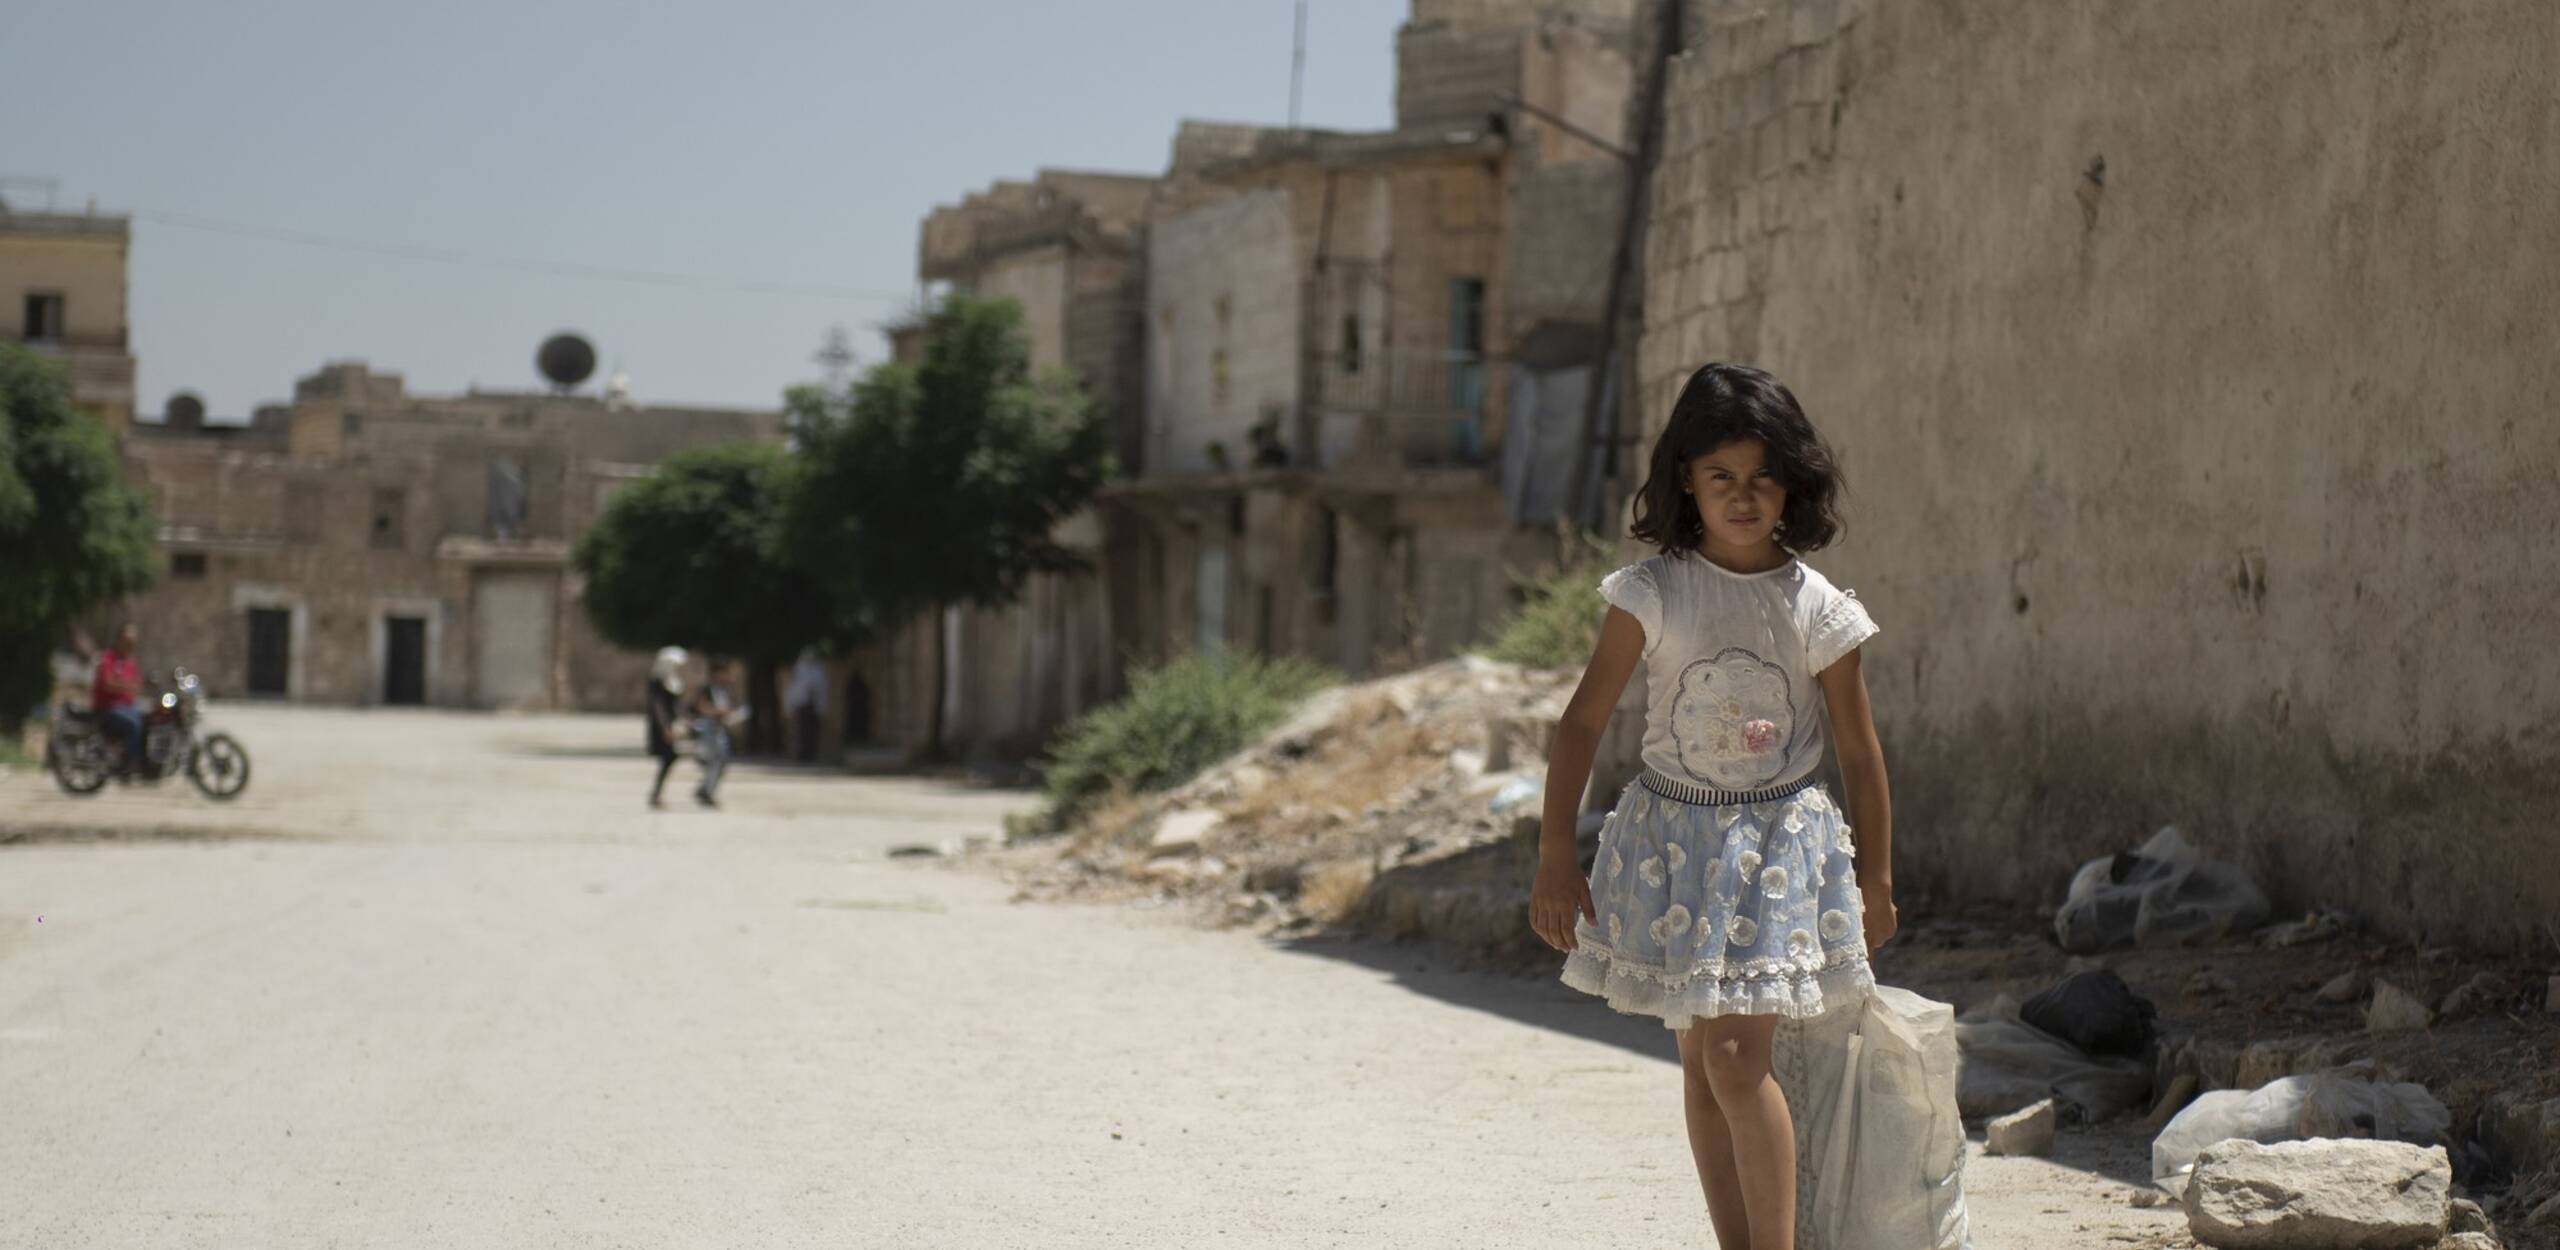 A girl walks through the Jabal Bedro neighbourhood in Aleppo, a city shattered by the earthquake and the war.